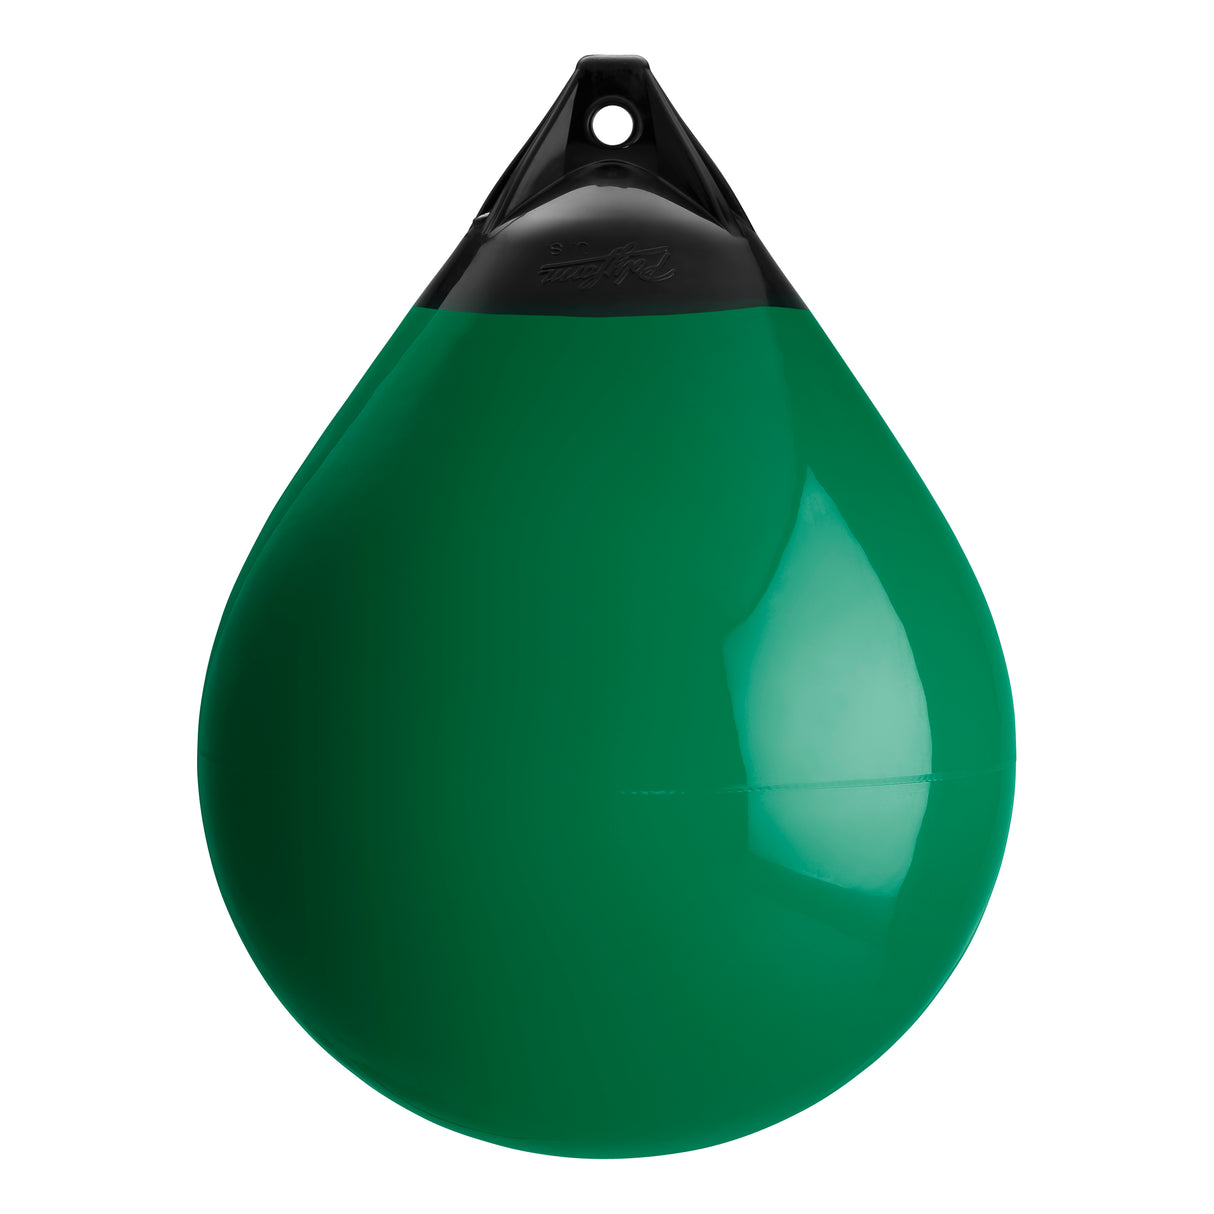 Forest Green buoy with Black-Top, Polyform A-5